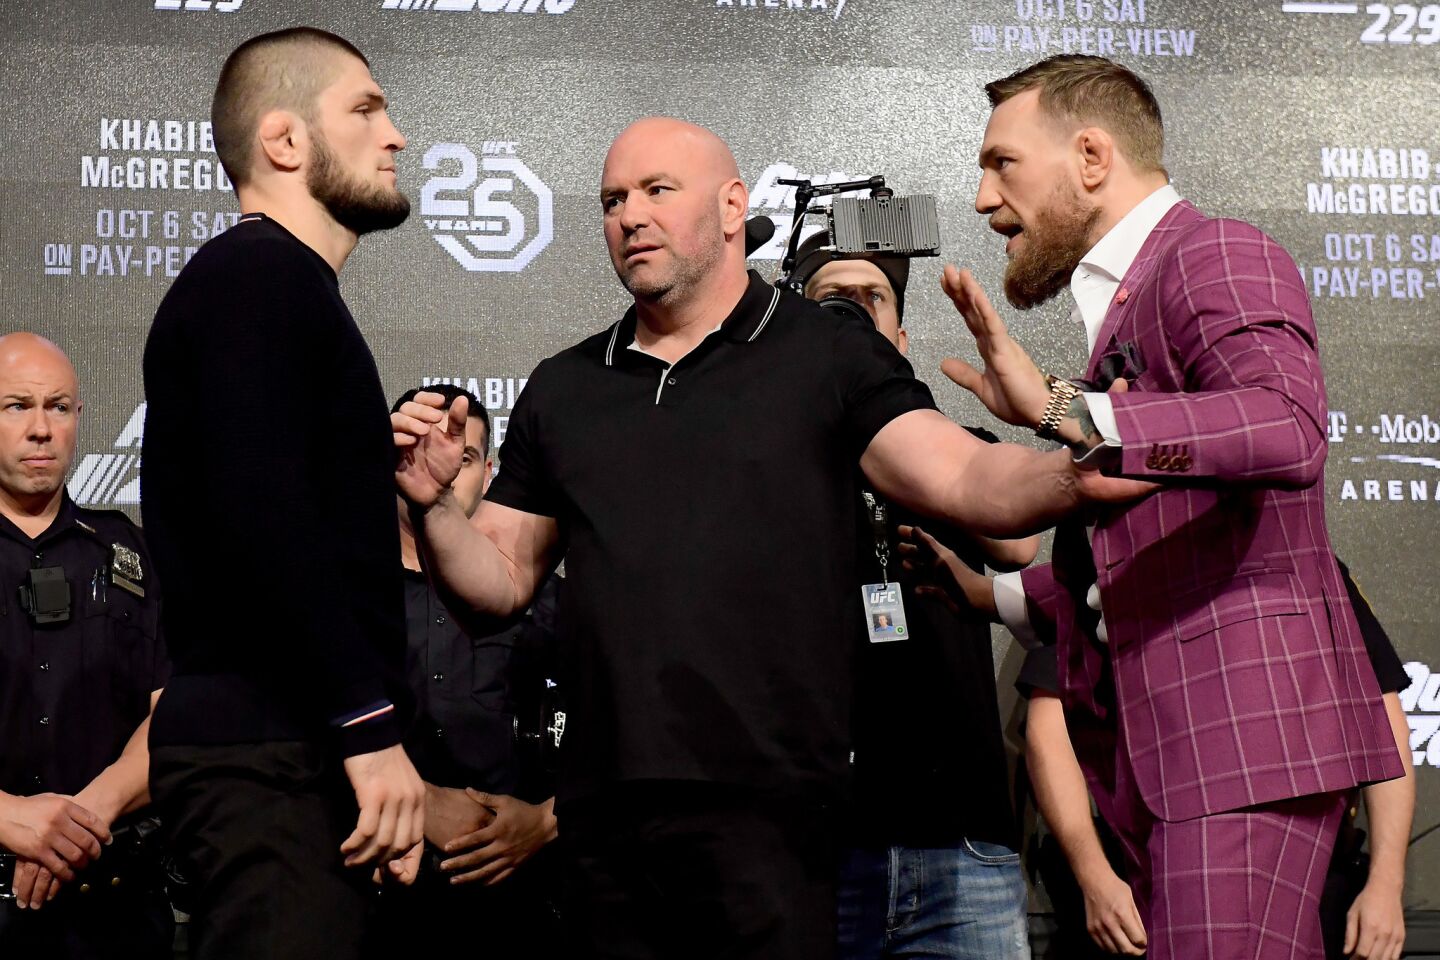 NEW YORK, NY - SEPTEMBER 20: Lightweight champion Khabib Nurmagomedov faces-off with Conor McGregor during the UFC 229 Press Conference at Radio City Music Hall on September 20, 2018 in New York City. (Photo by Steven Ryan/Getty Images) ** OUTS - ELSENT, FPG, CM - OUTS * NM, PH, VA if sourced by CT, LA or MoD **